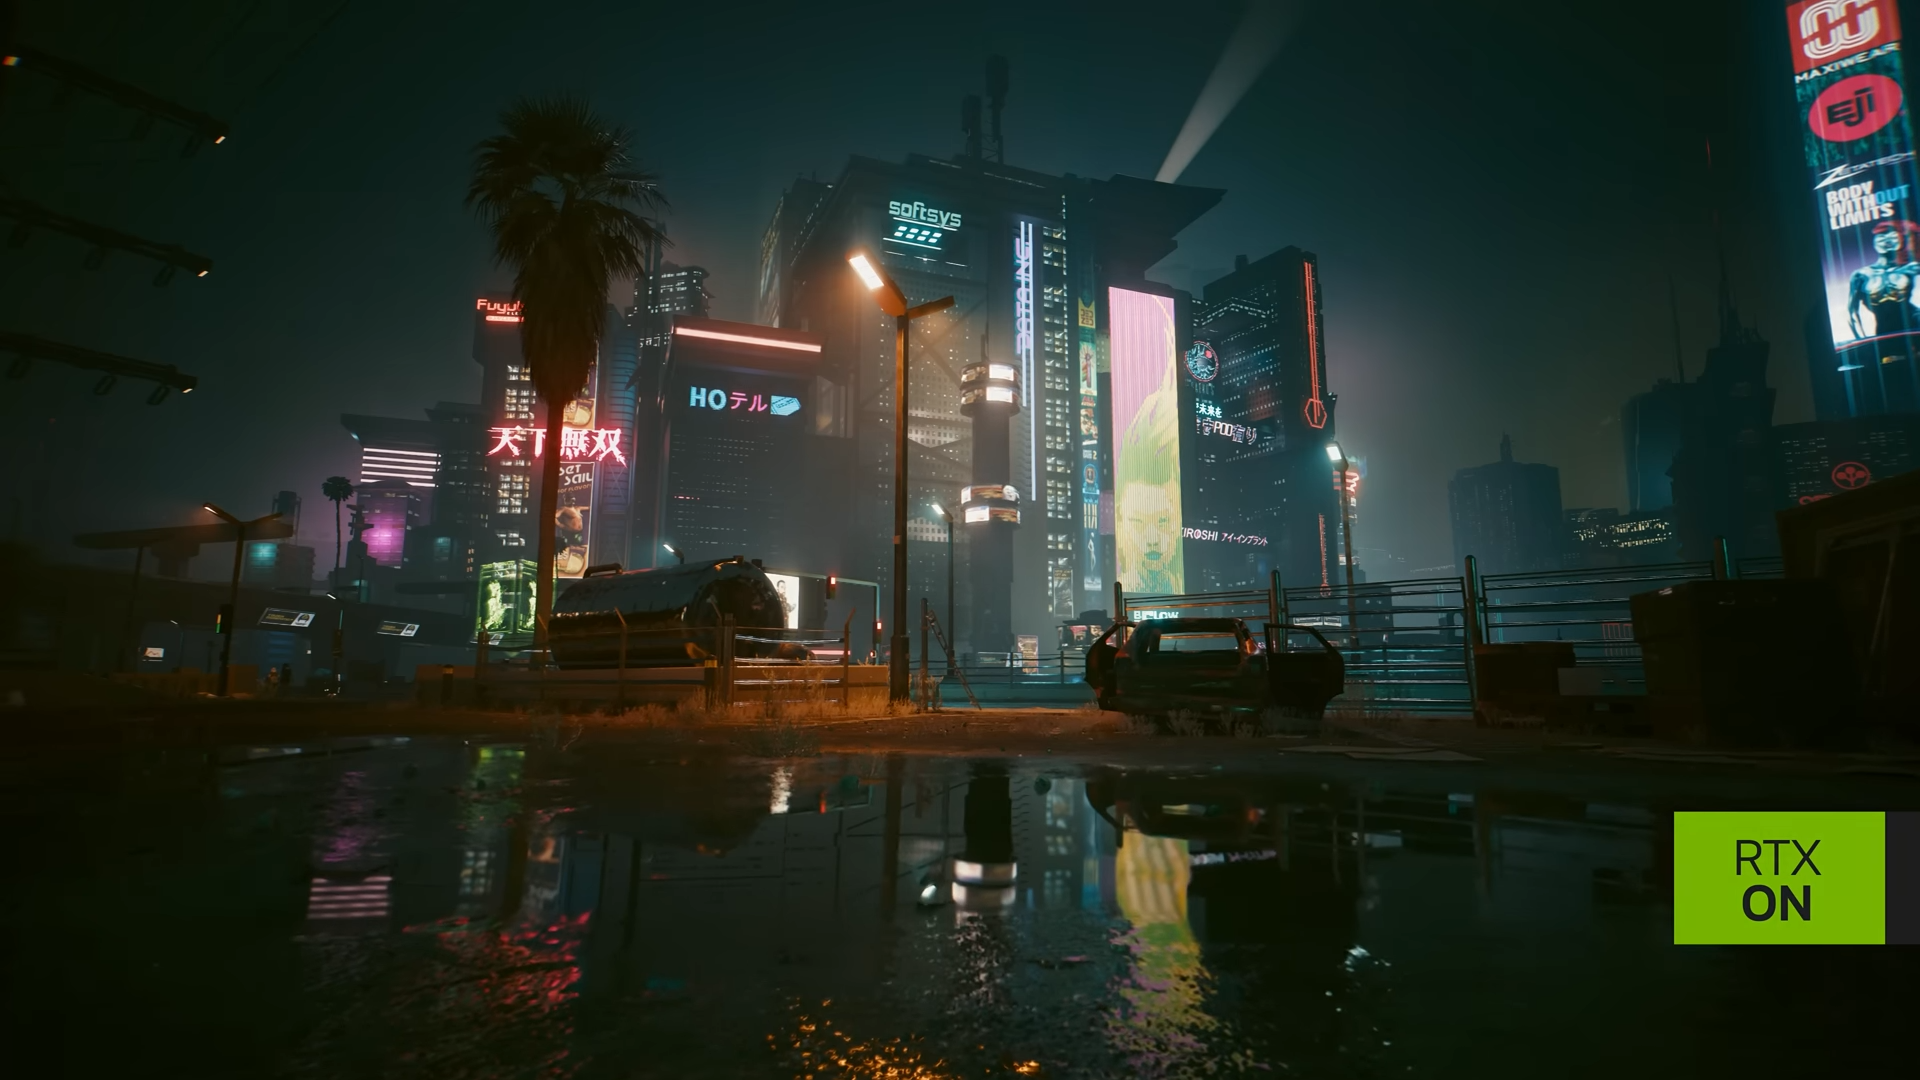 Cyberpunk 2077's Ray Tracing: Overdrive Mode Brings RTX 4090 to Its Knees  with DLSS Off at 16 FPS in 4K